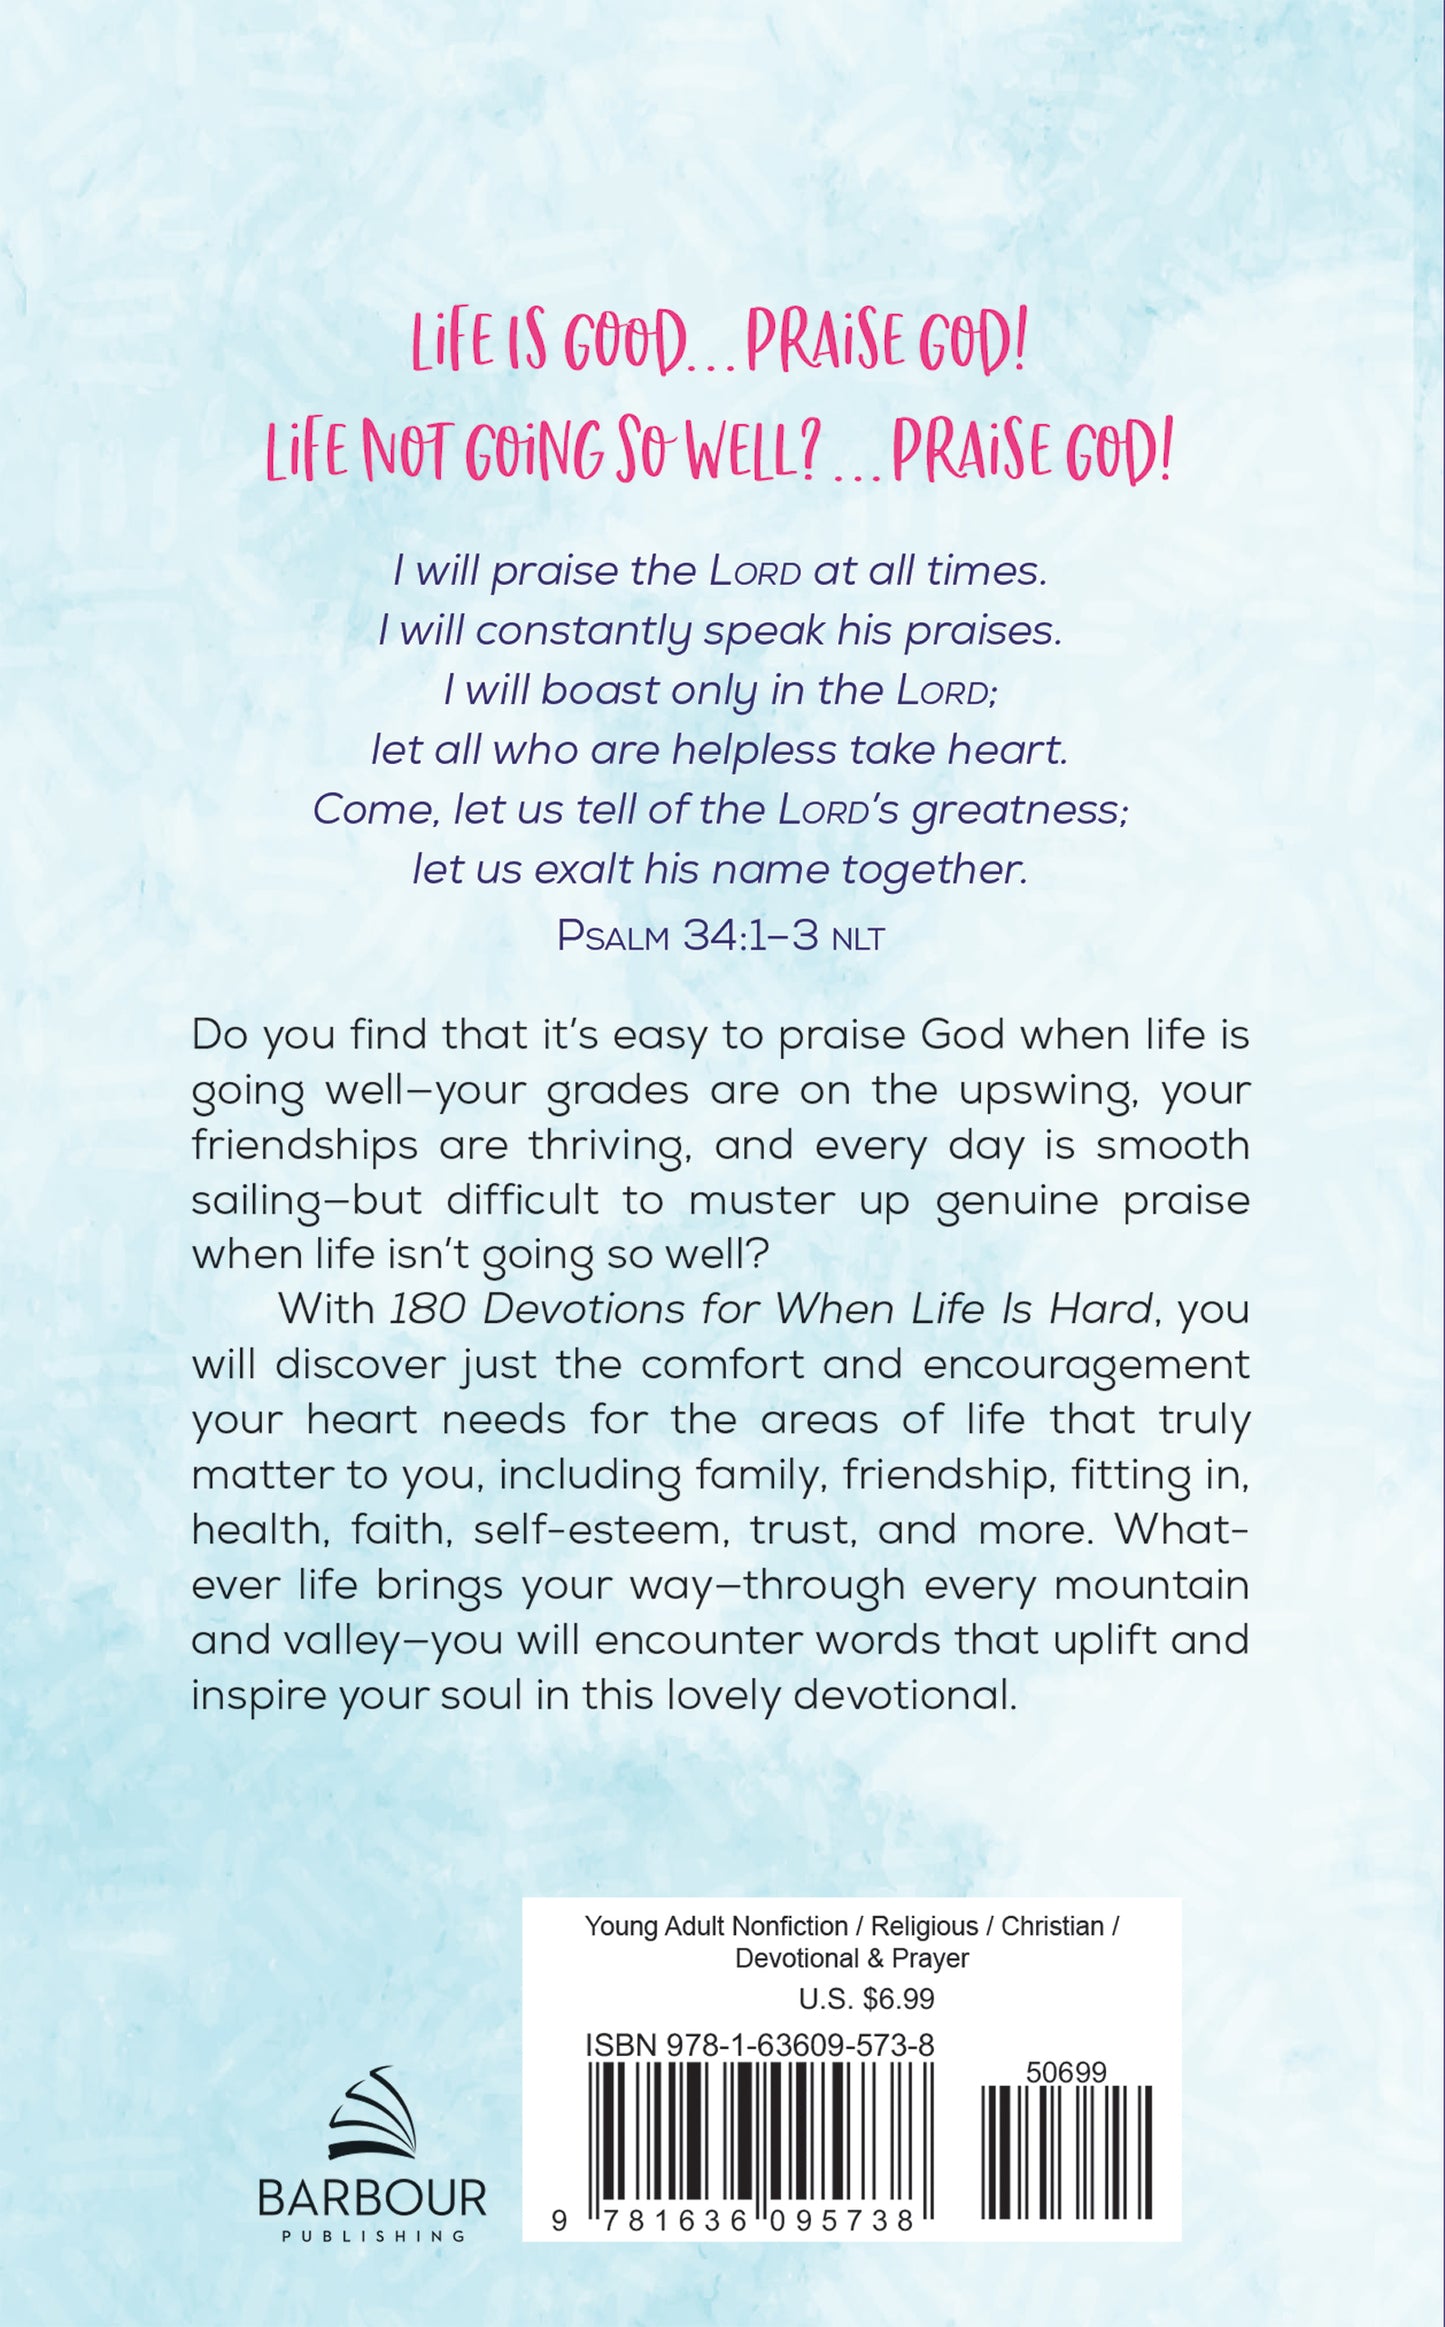 180 Devotions for When Life Is Hard (teen girl) - The Christian Gift Company